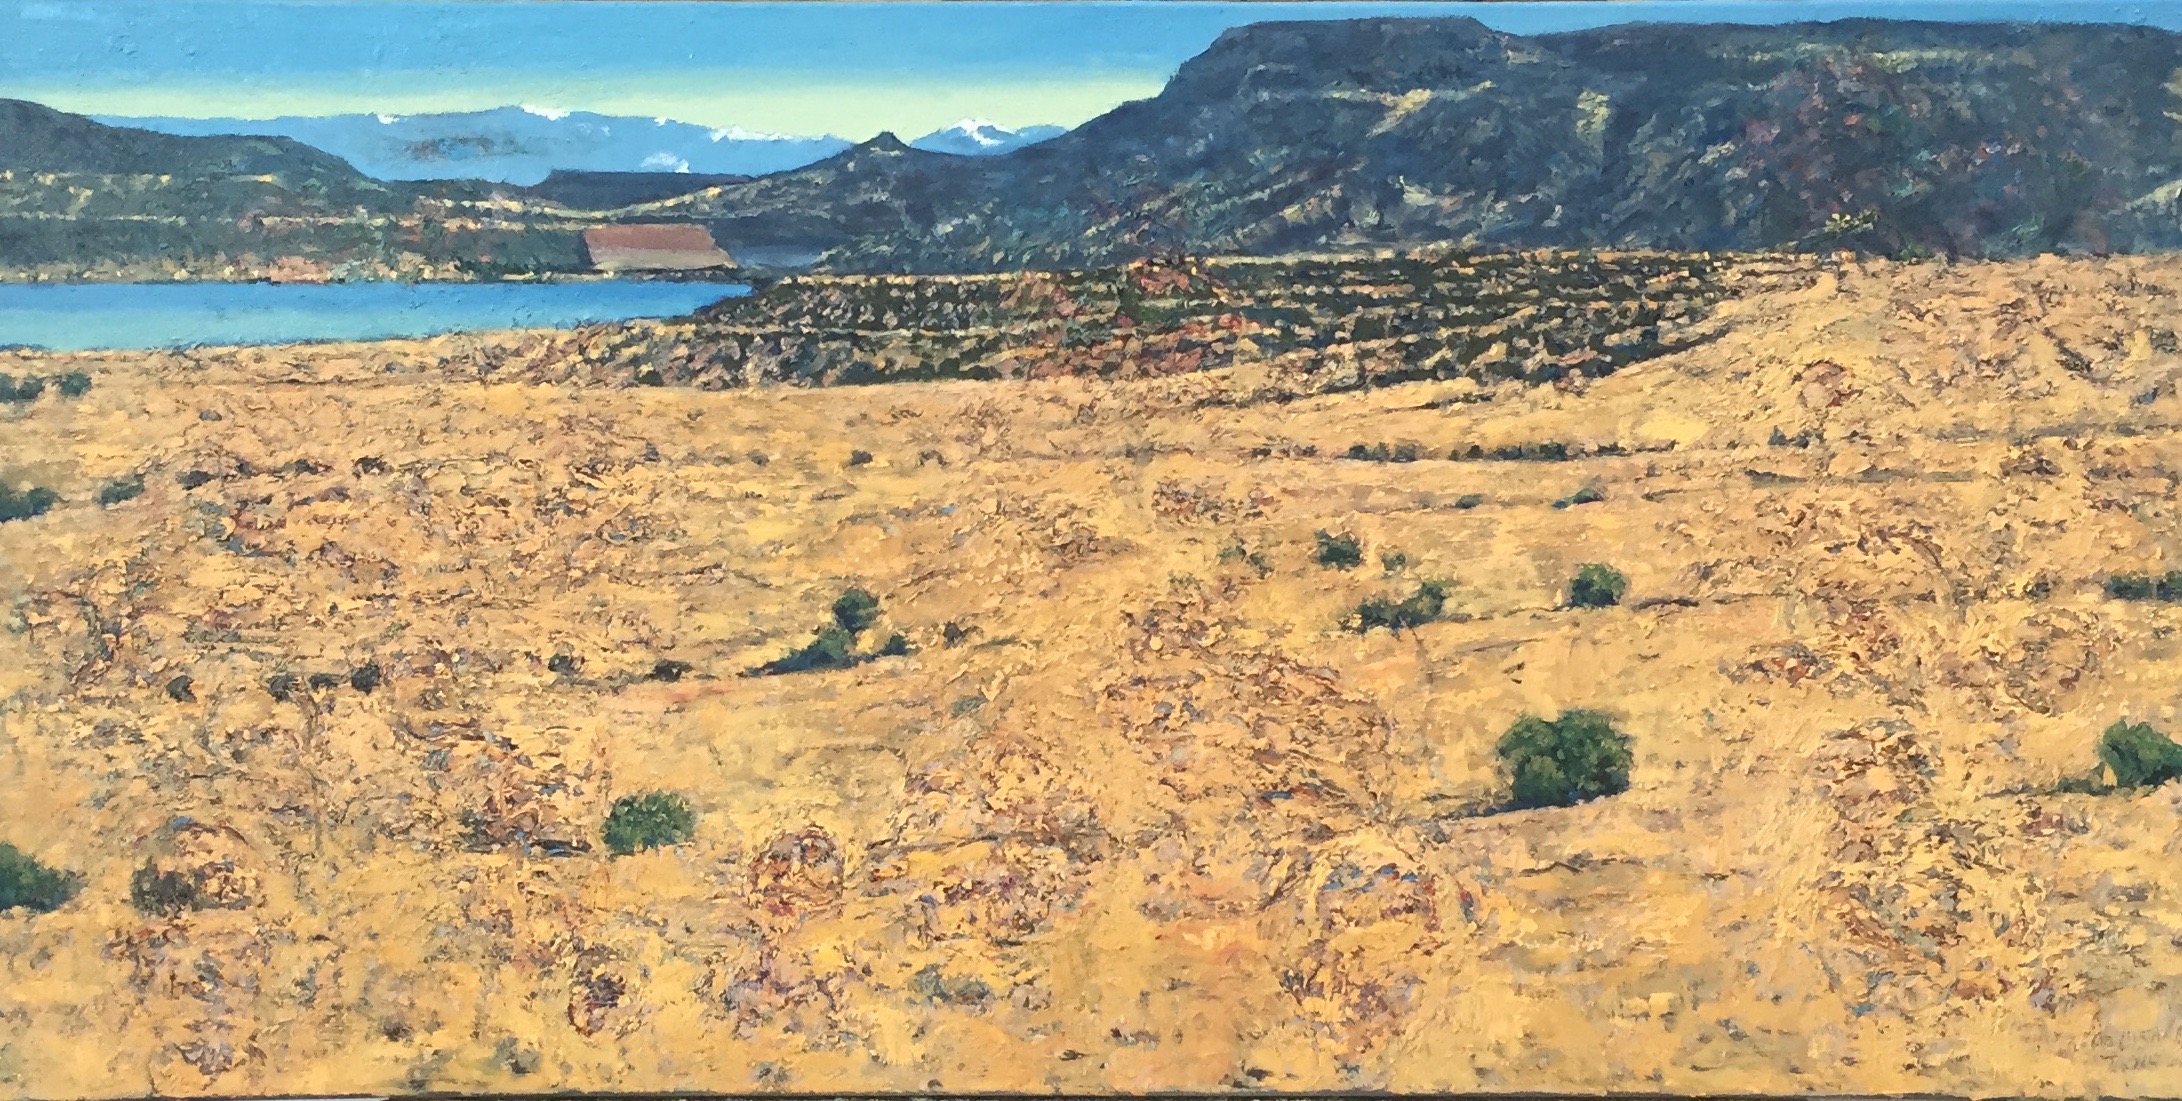  Provisional Subtle Anomalies Detected 2015 oil on canvas 24" x 48" 15011 